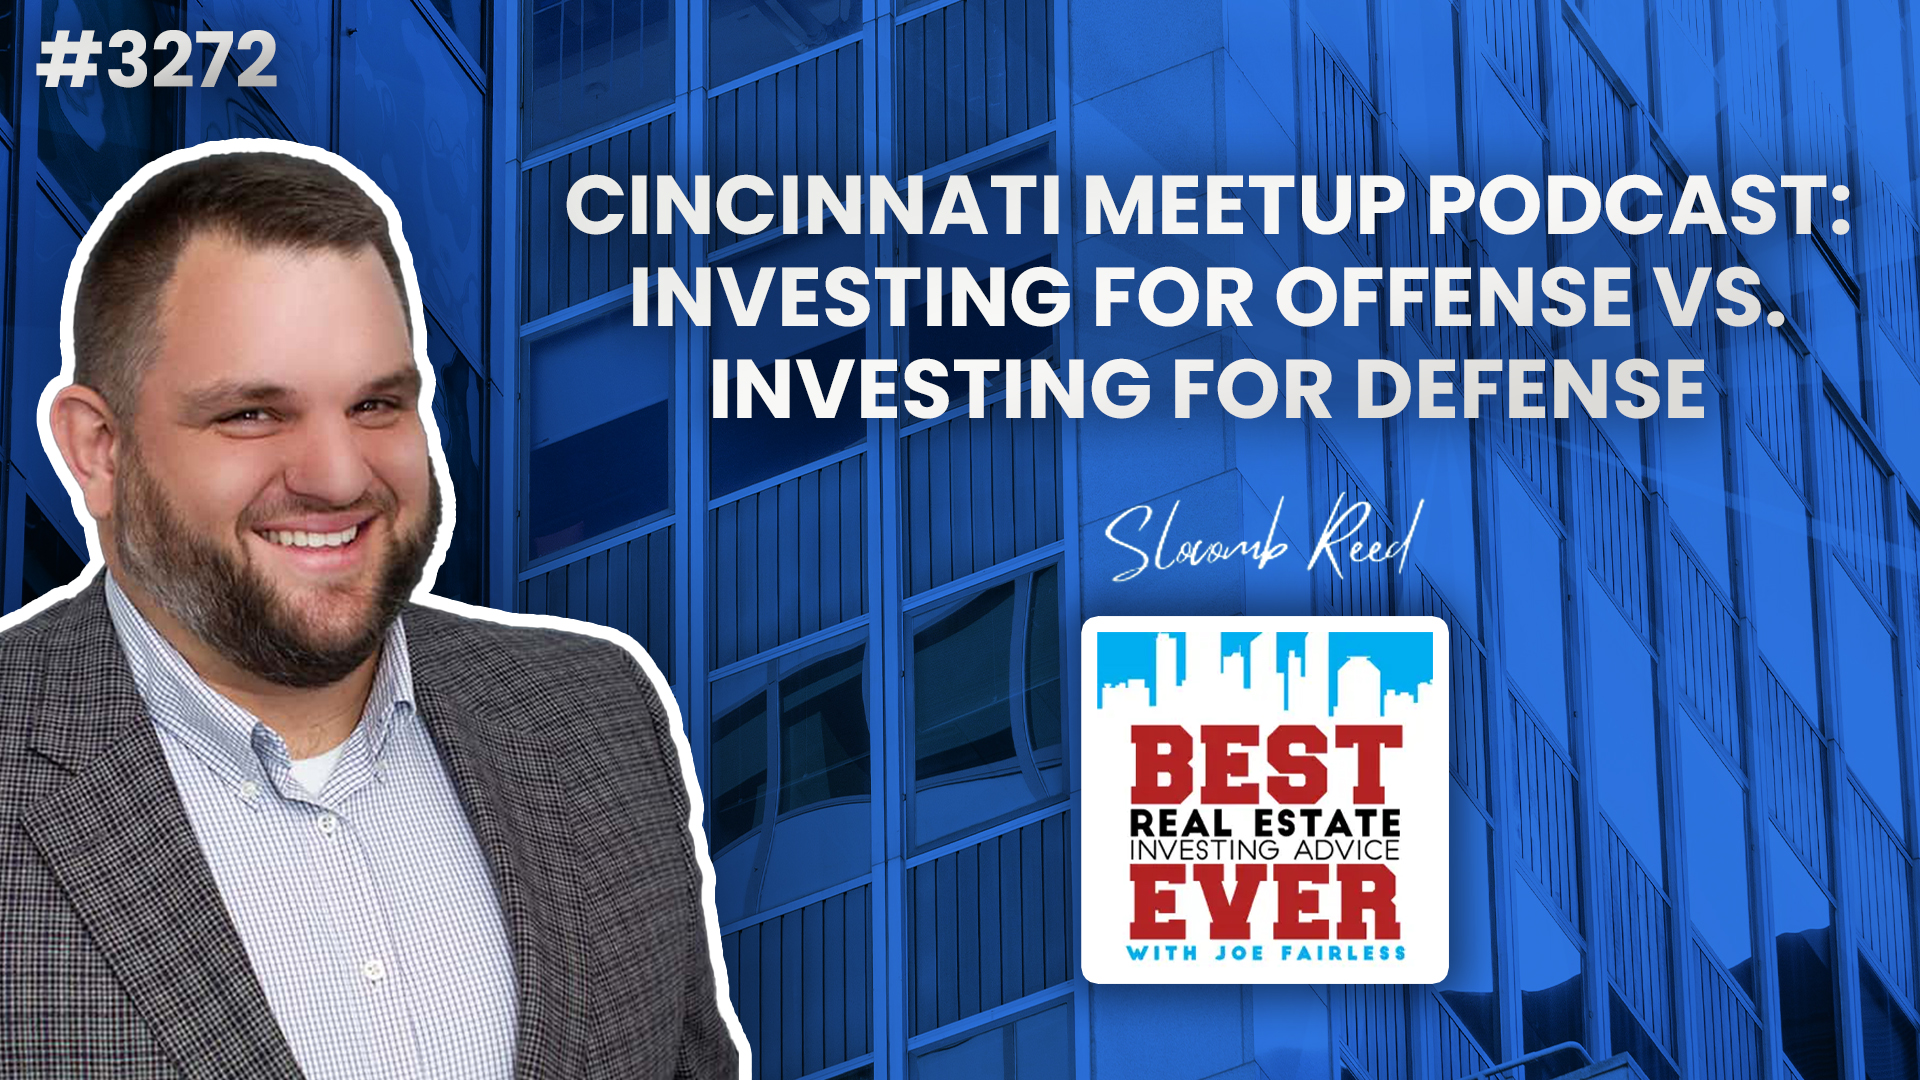 JF3272: Cincinnati Meetup Podcast — Investing for Offense vs. Investing for Defense